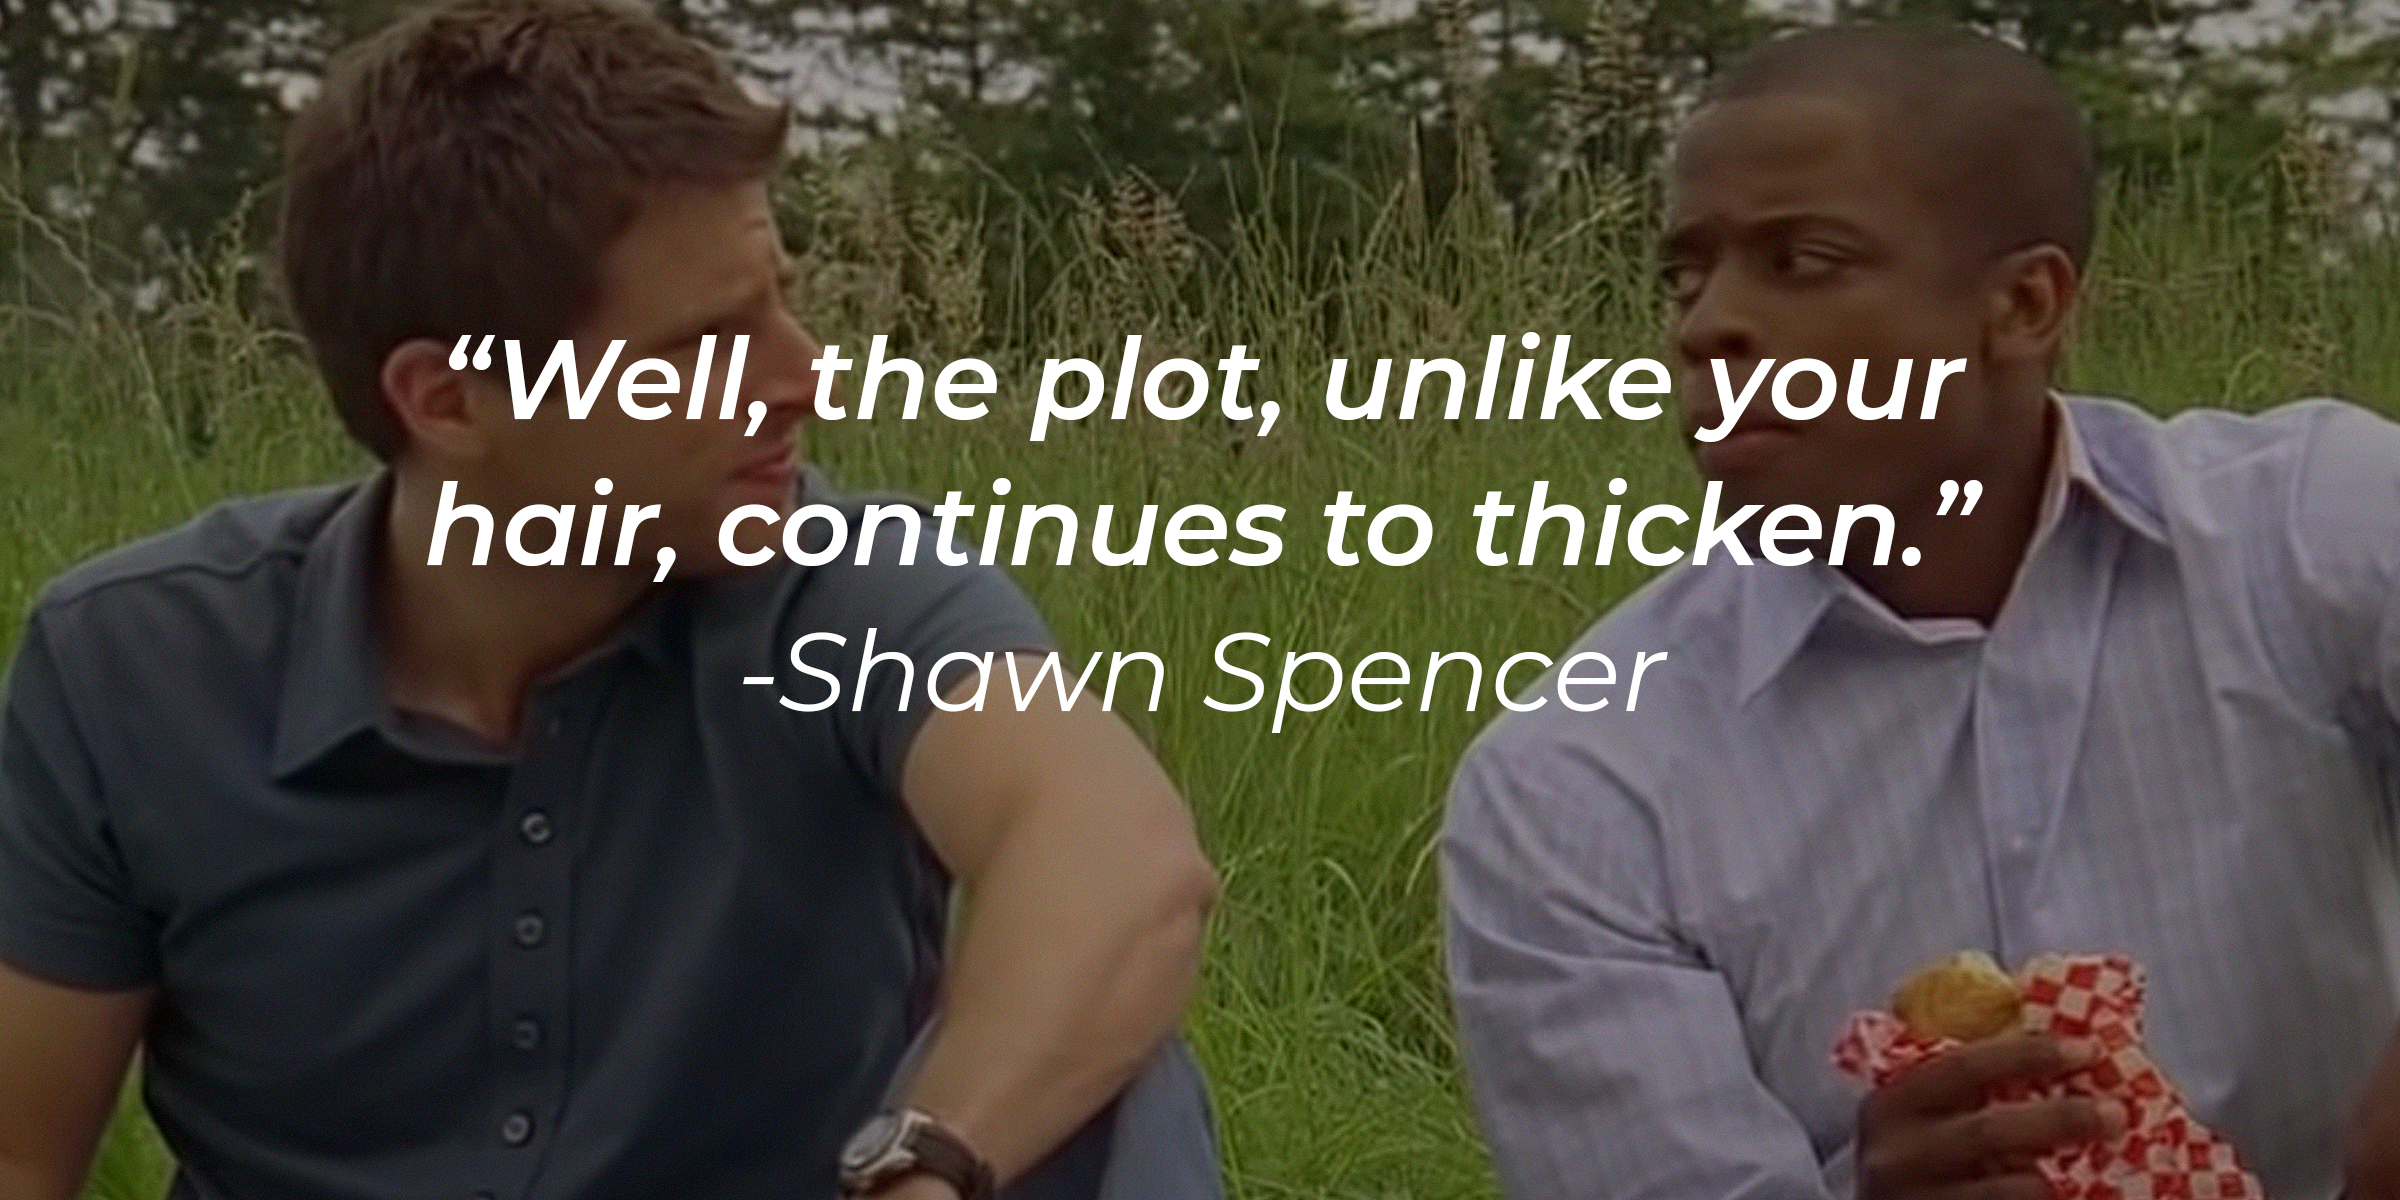 Shawn Spencer with his quote: "Well, the plot, unlike your hair, continues to thicken." | Source: youtube.com/Psych